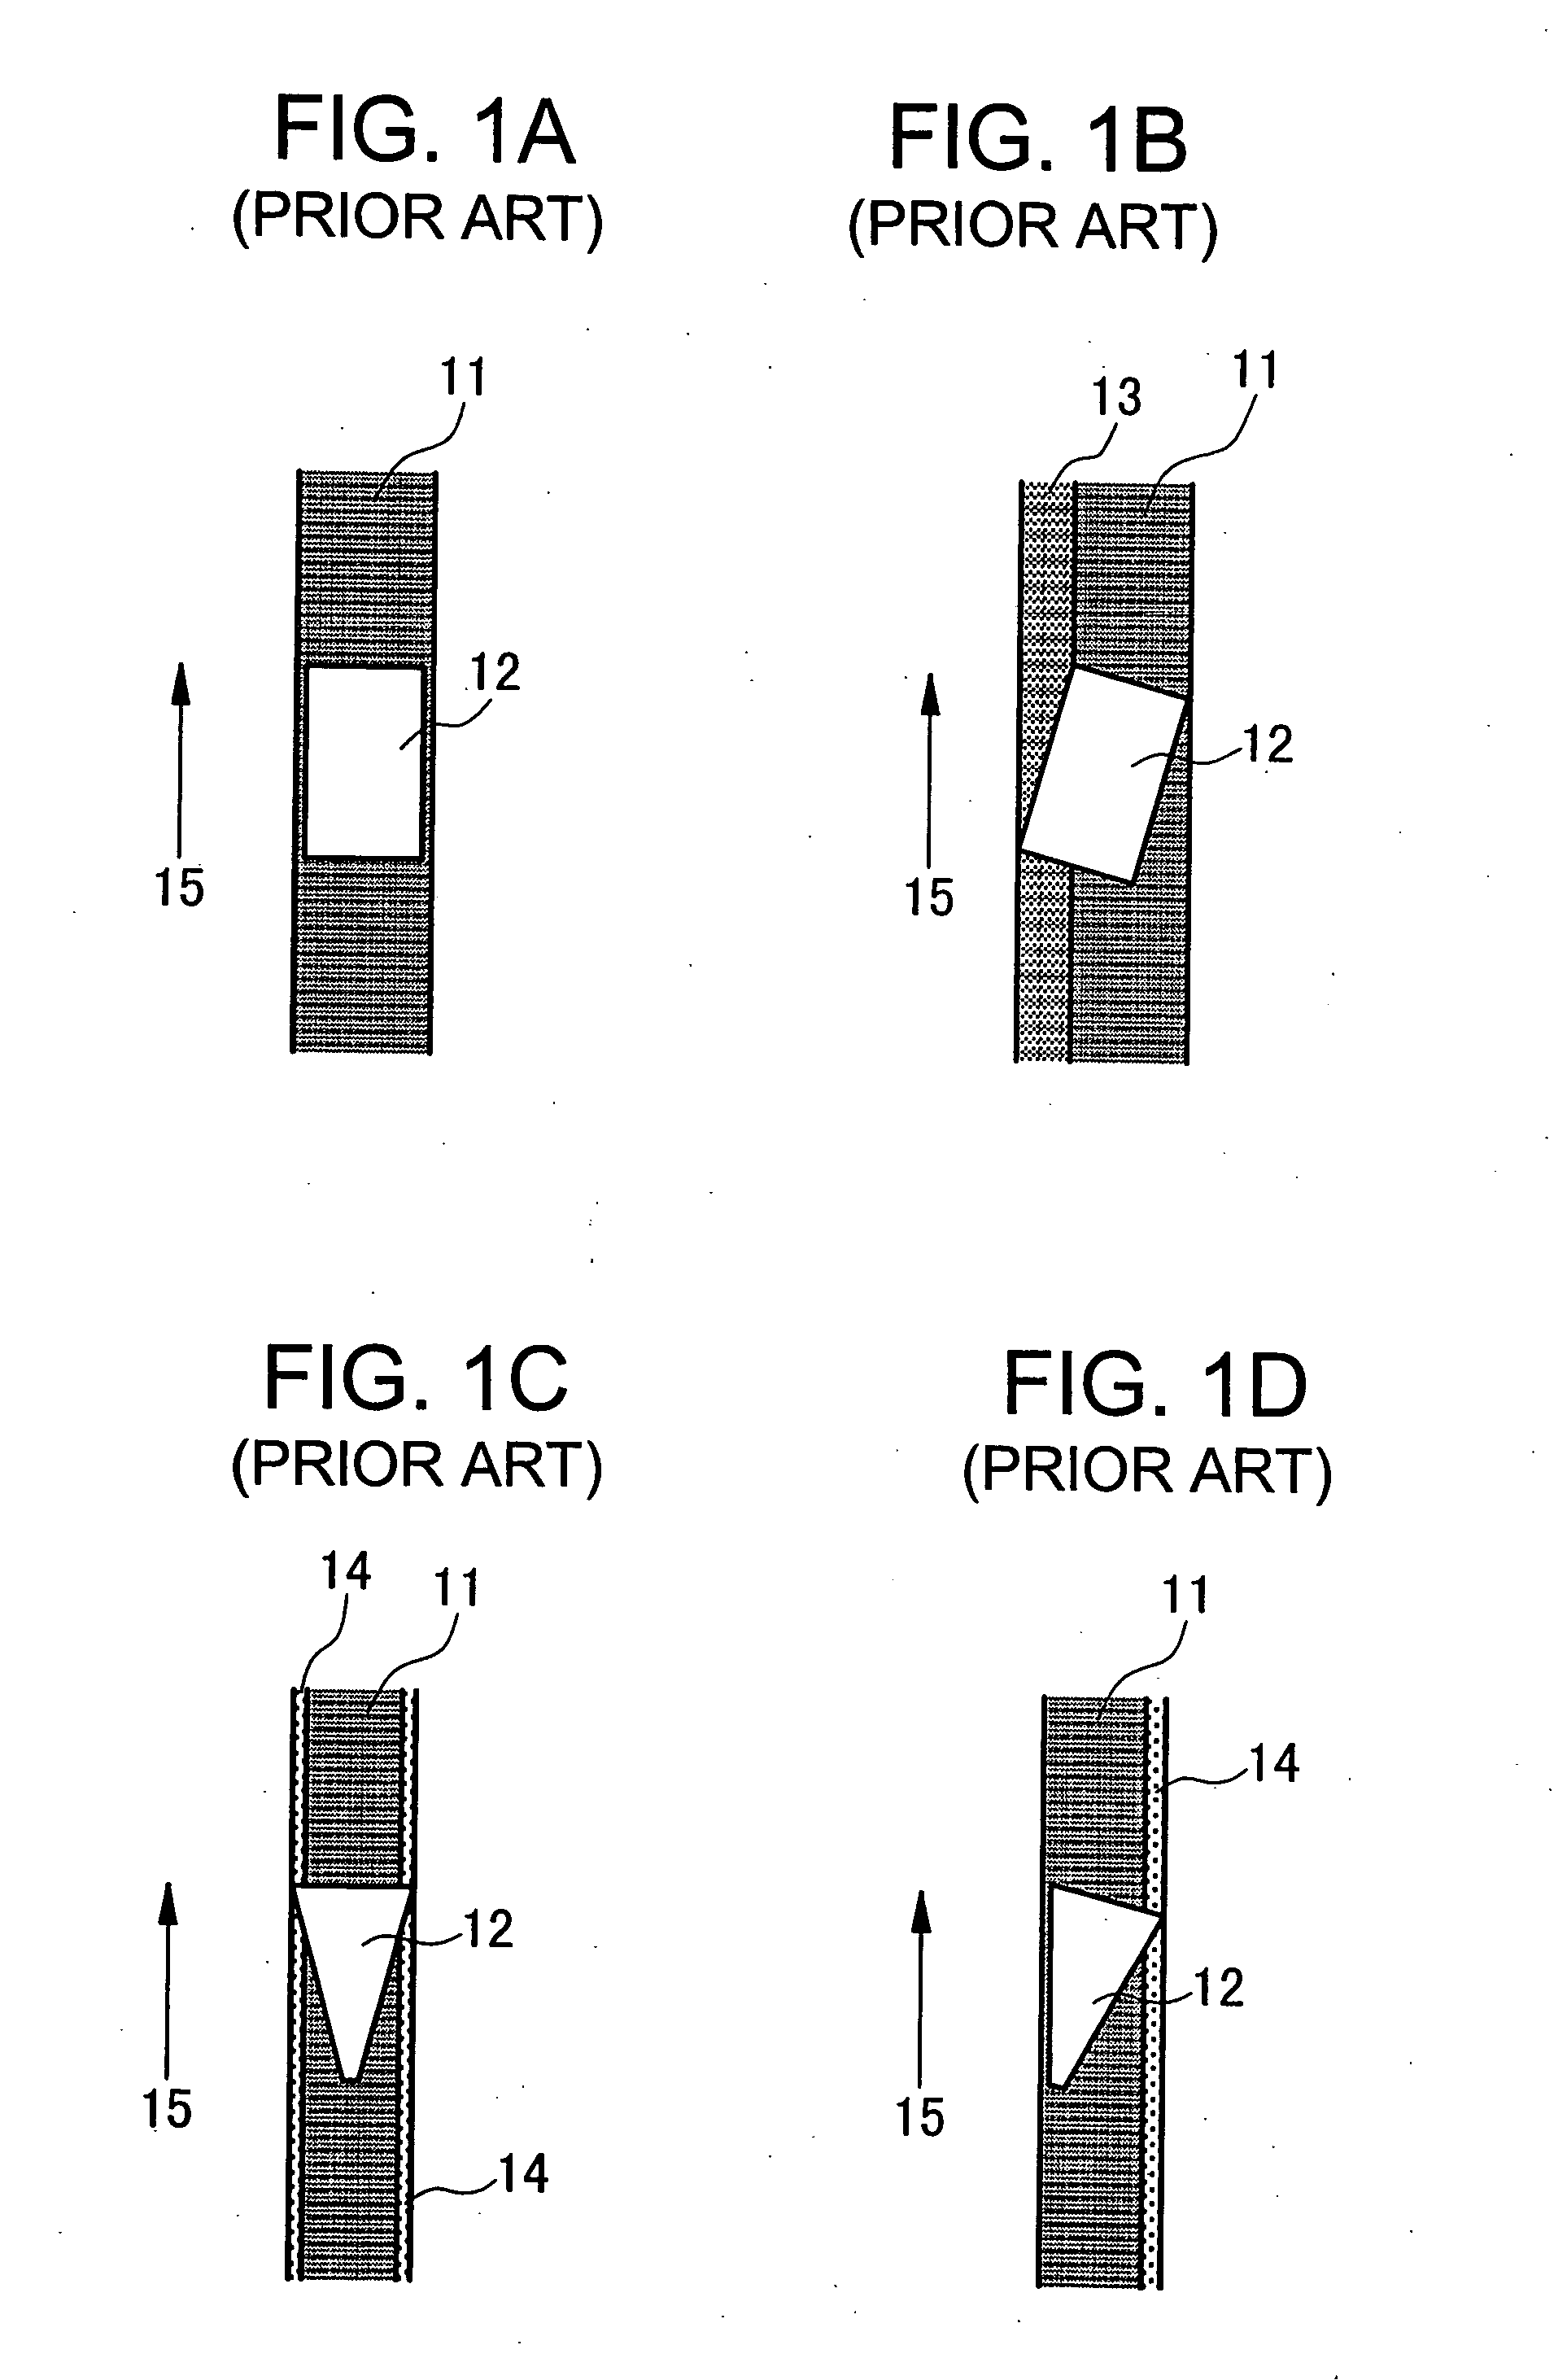 Magnetic heads for perpendicular recording and magnetic recording disk apparatus using the same